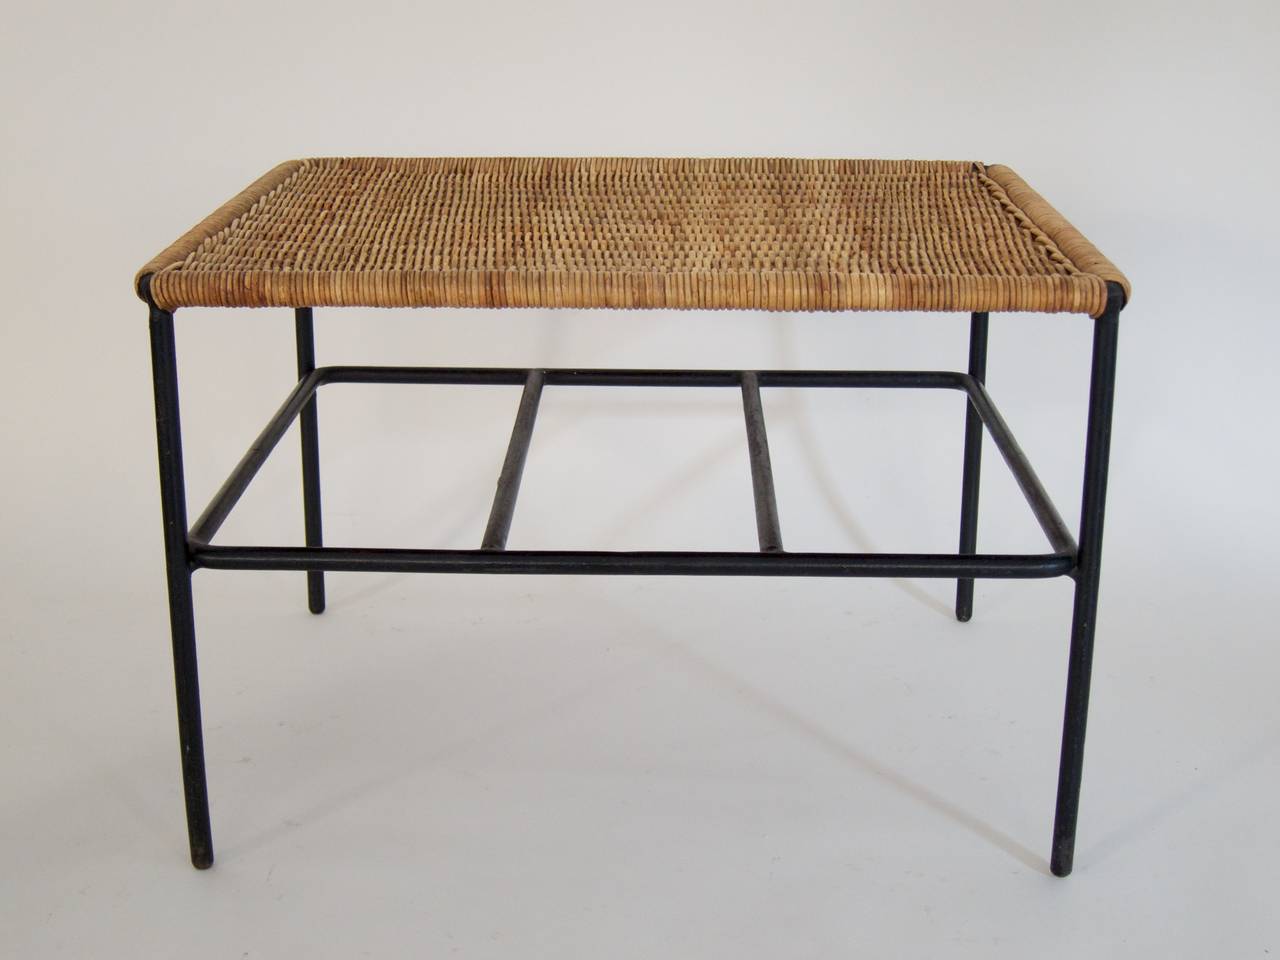 Very rare coffee table with a news rack
designed in the 1950s by Carl Auböck
Wicker, black painted steel rods
Good, original condition with minor traces of usage and aging.